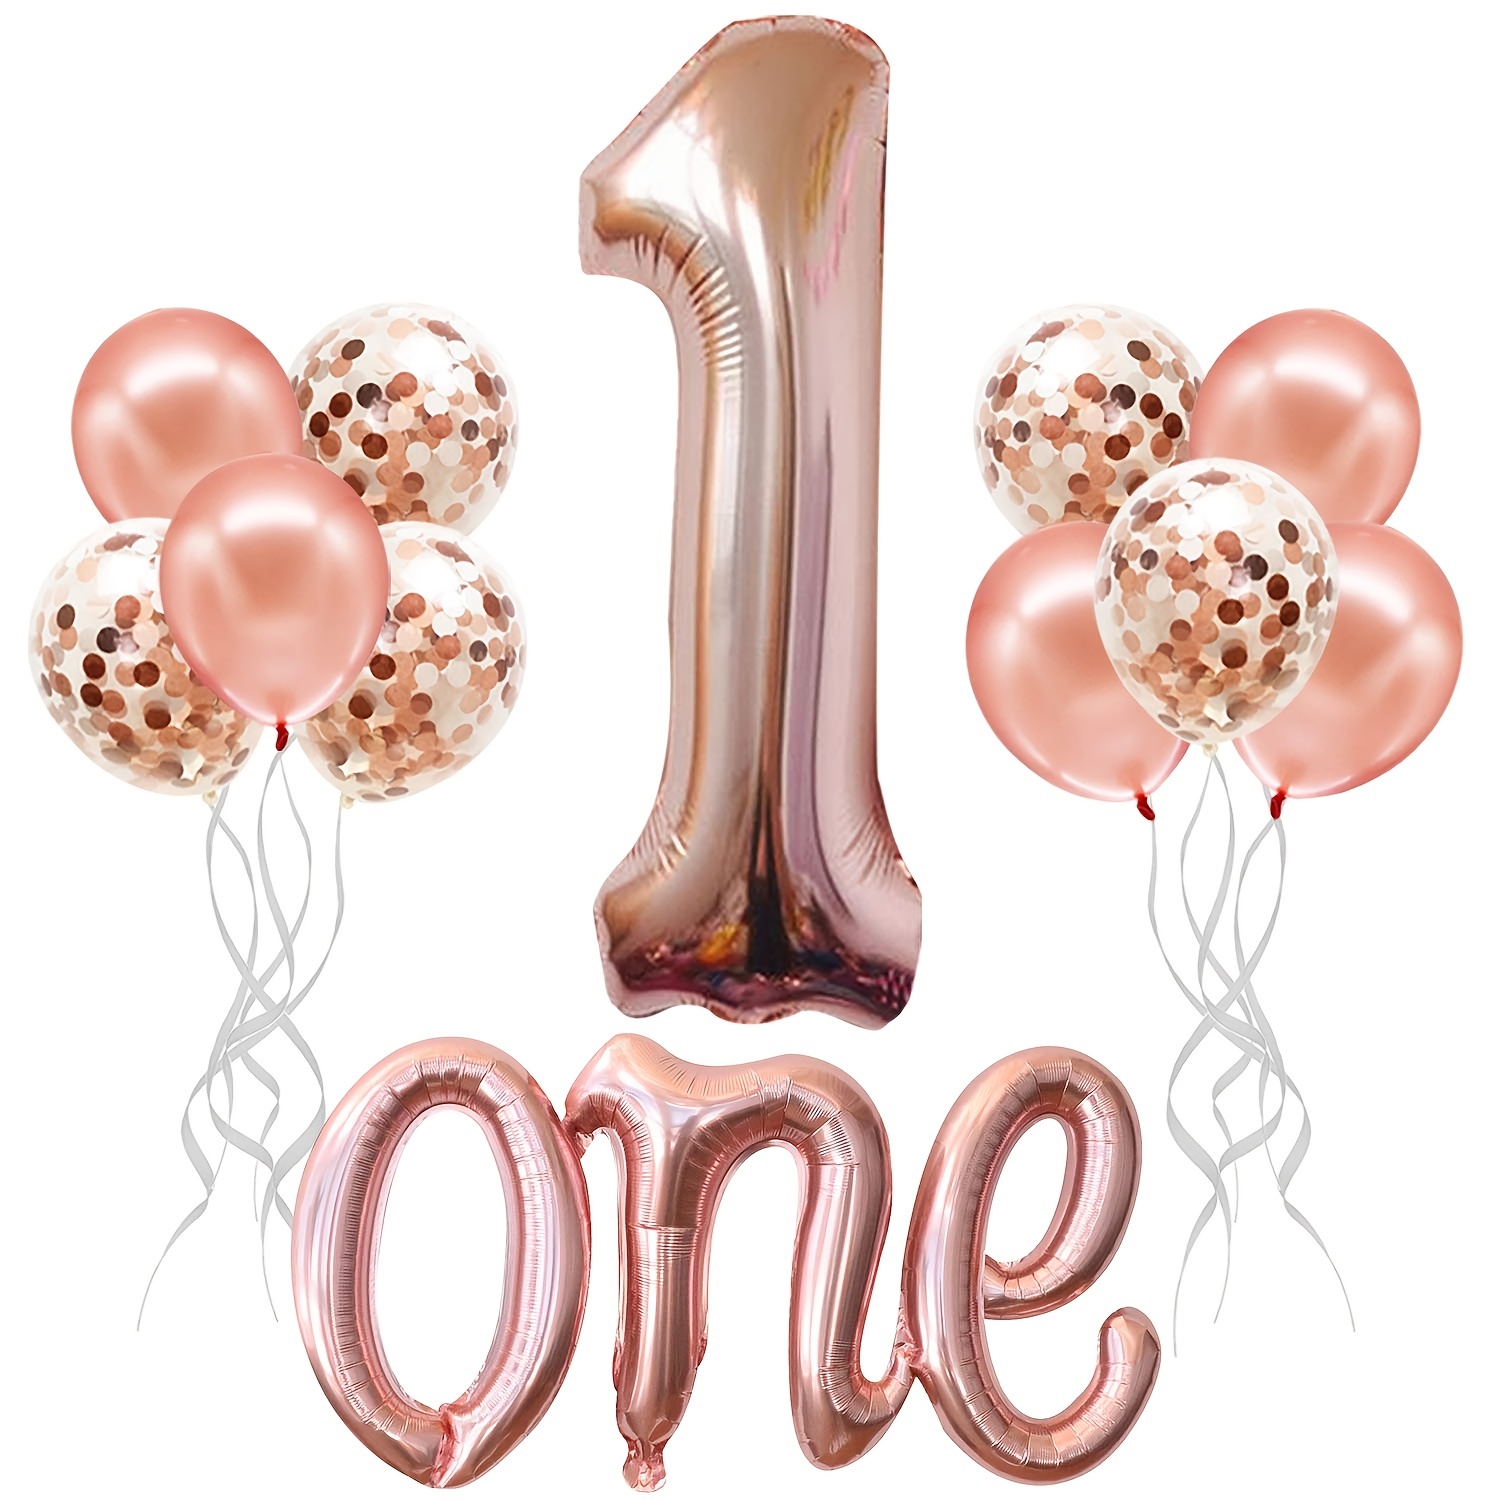 Lucky One Balloon Garland St Patricks Day 1st Birthday Party Decor St  Patricks Day First Birthday Party Decorations Girls Pink Green